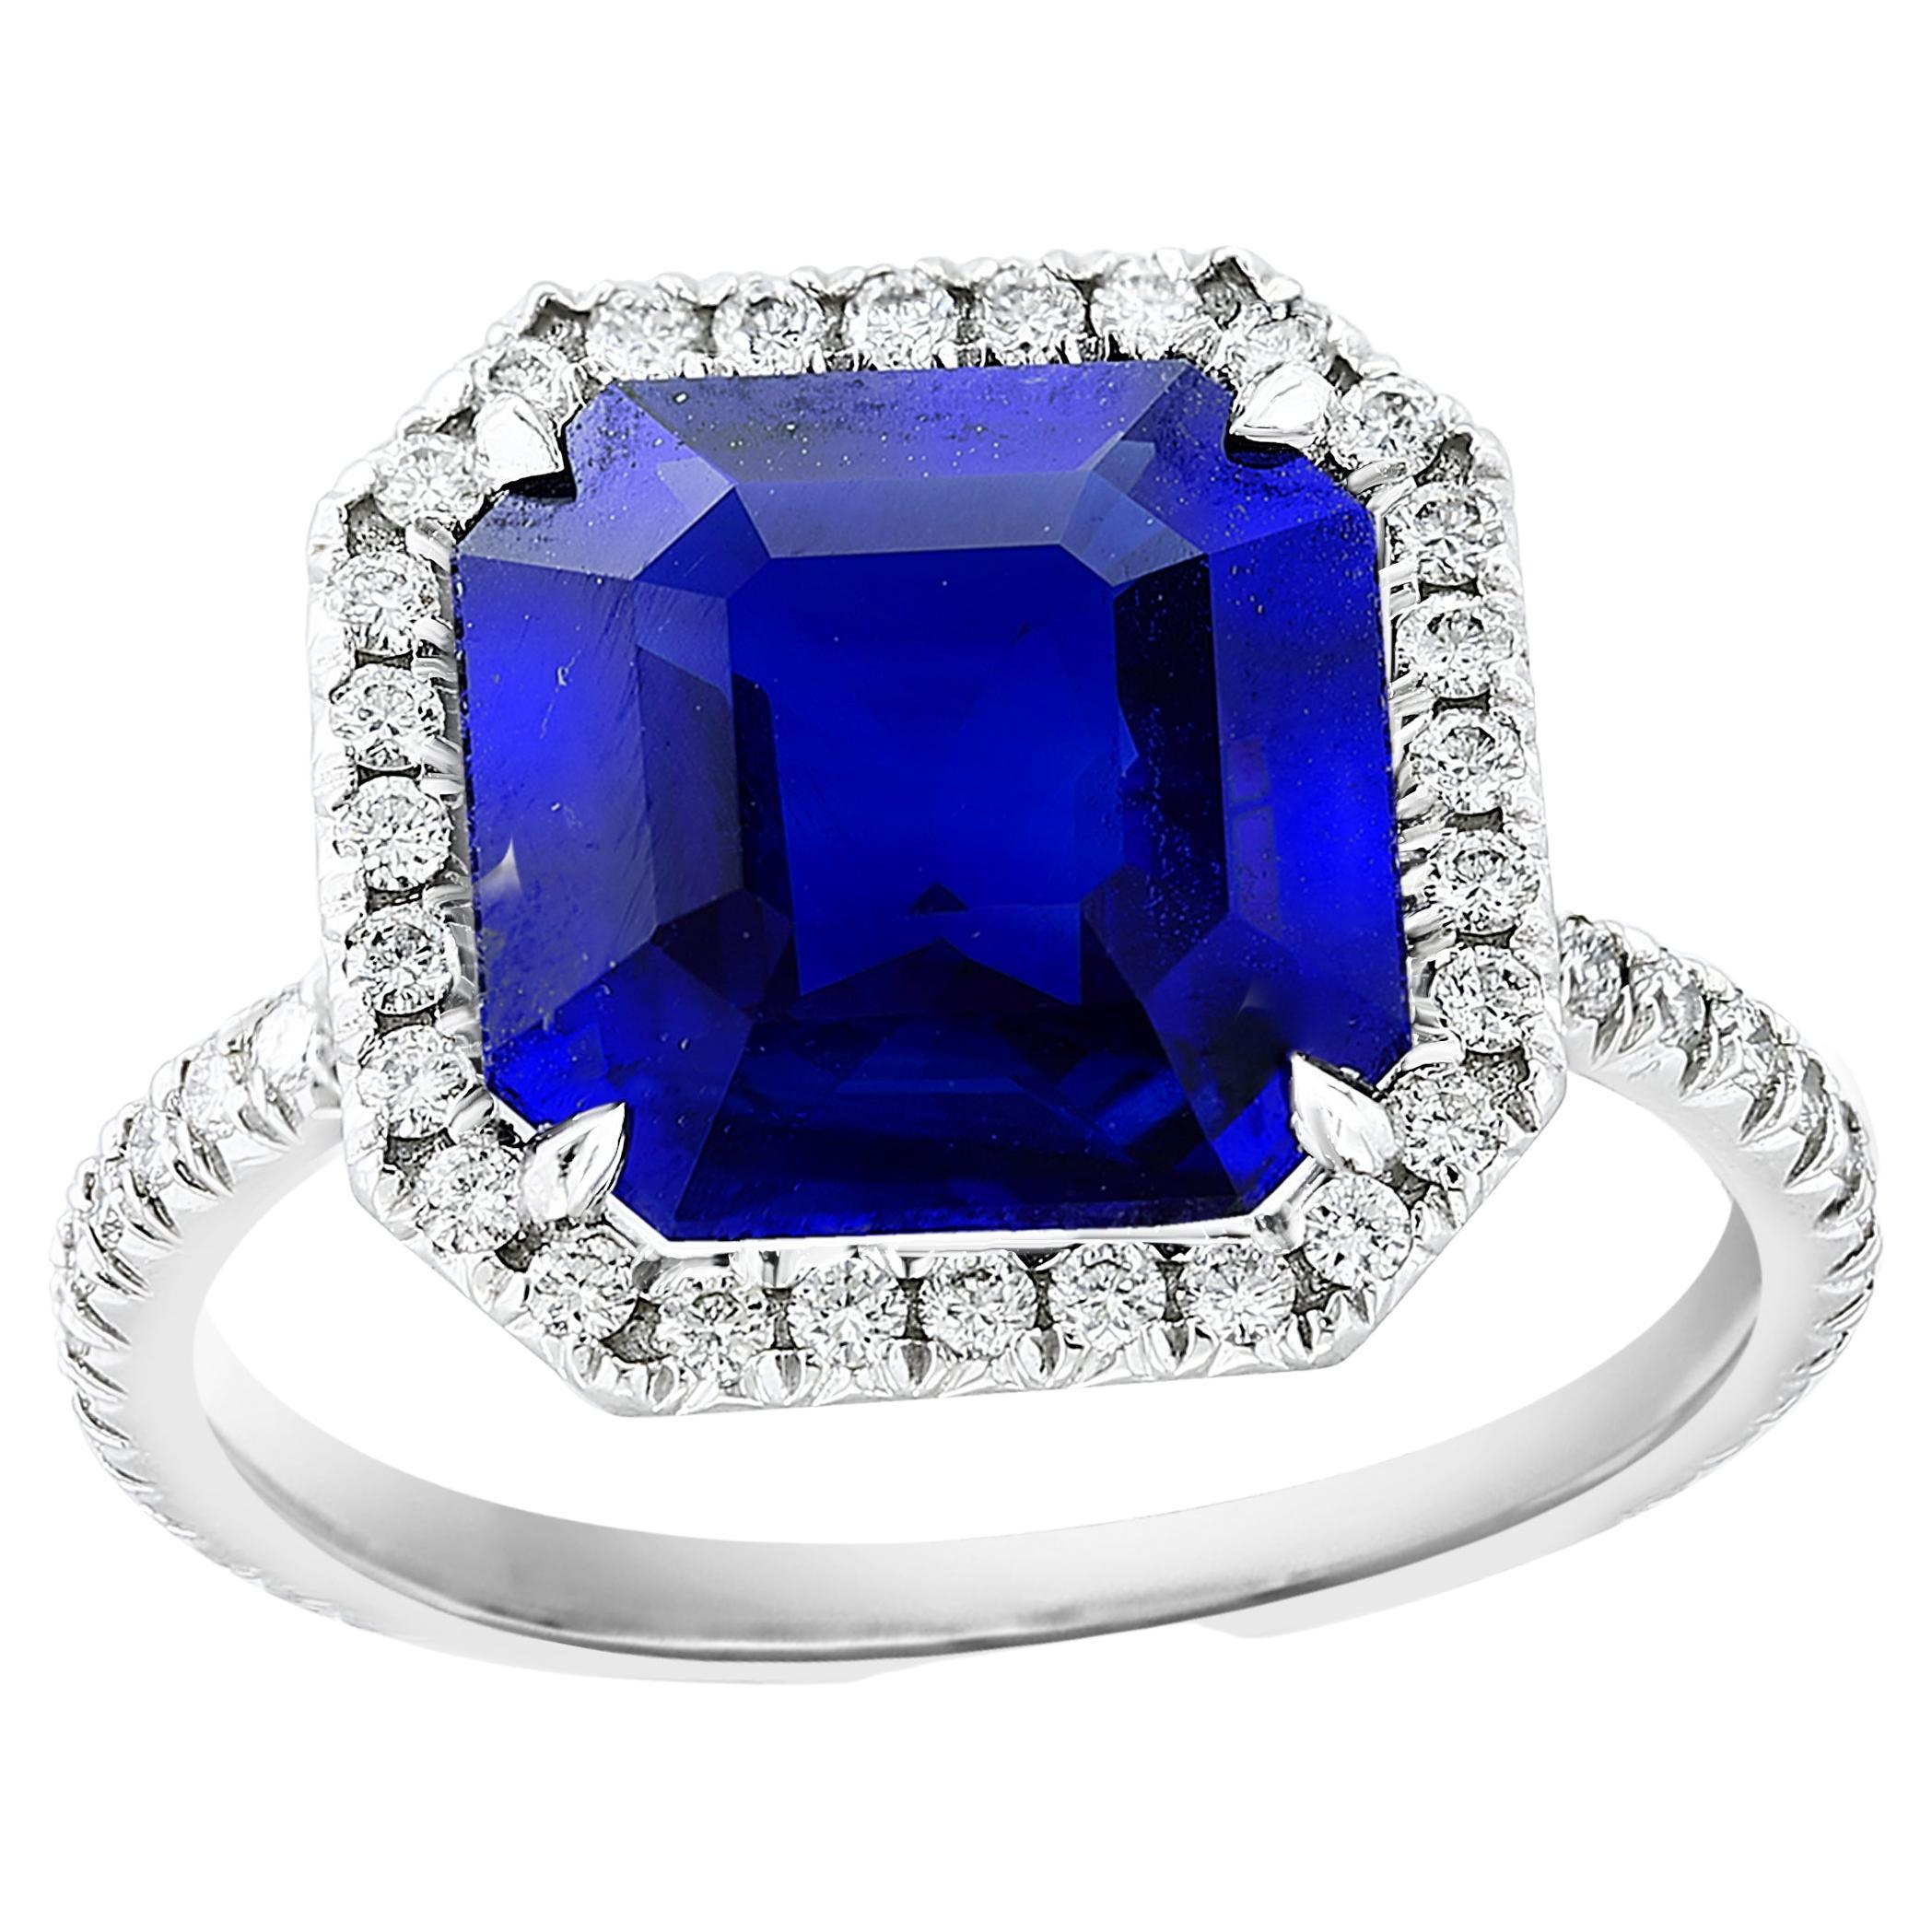 CERTIFIED 5.14 Carat Step Cut Sapphire and Diamond Engagement Ring in Platinum